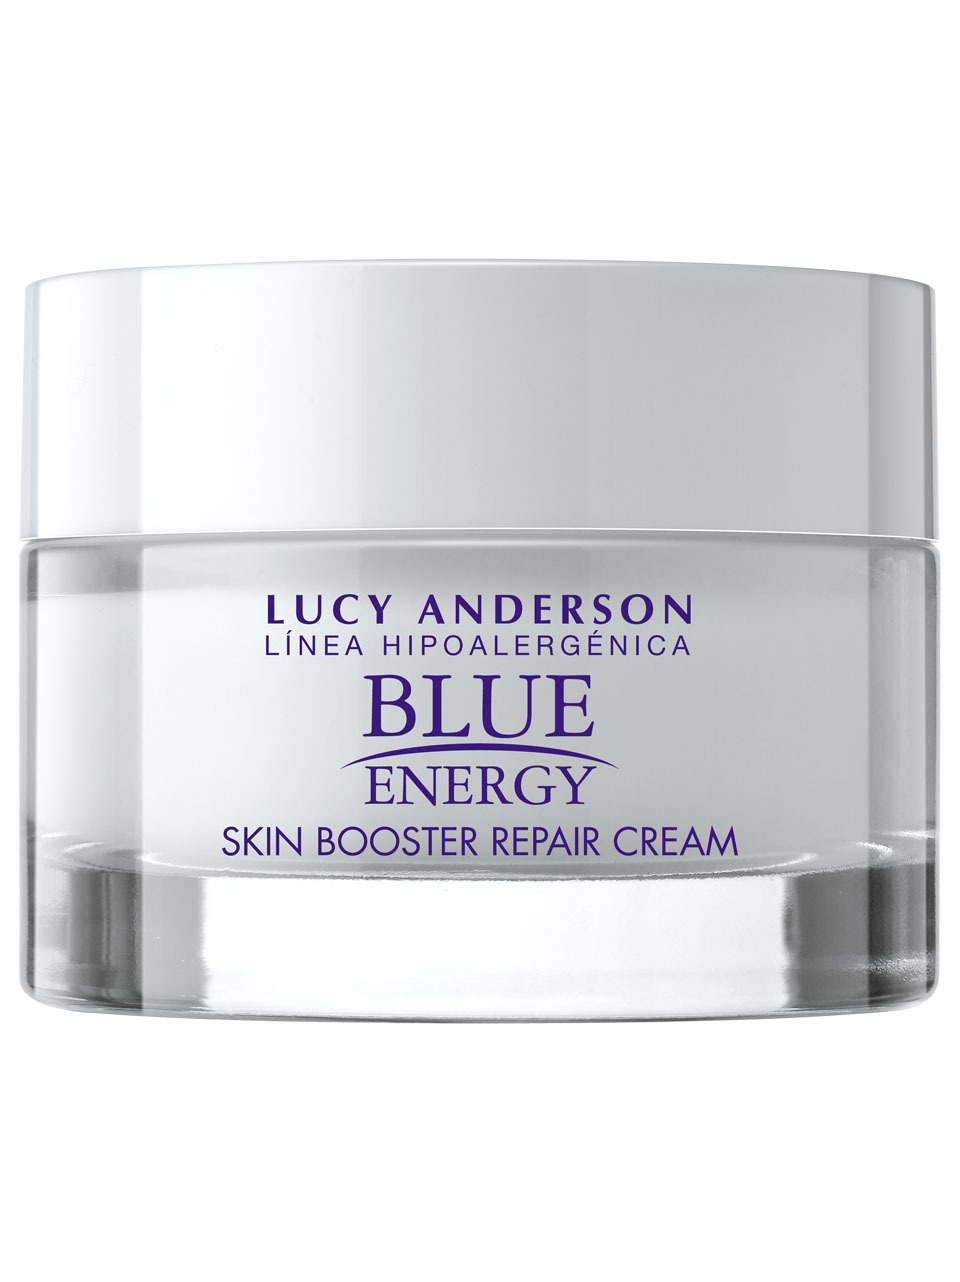 LUCY ANDERSON CREMA SKIN BOOSTER REPAIR CREAM BLUE ENERGY X 50 G.